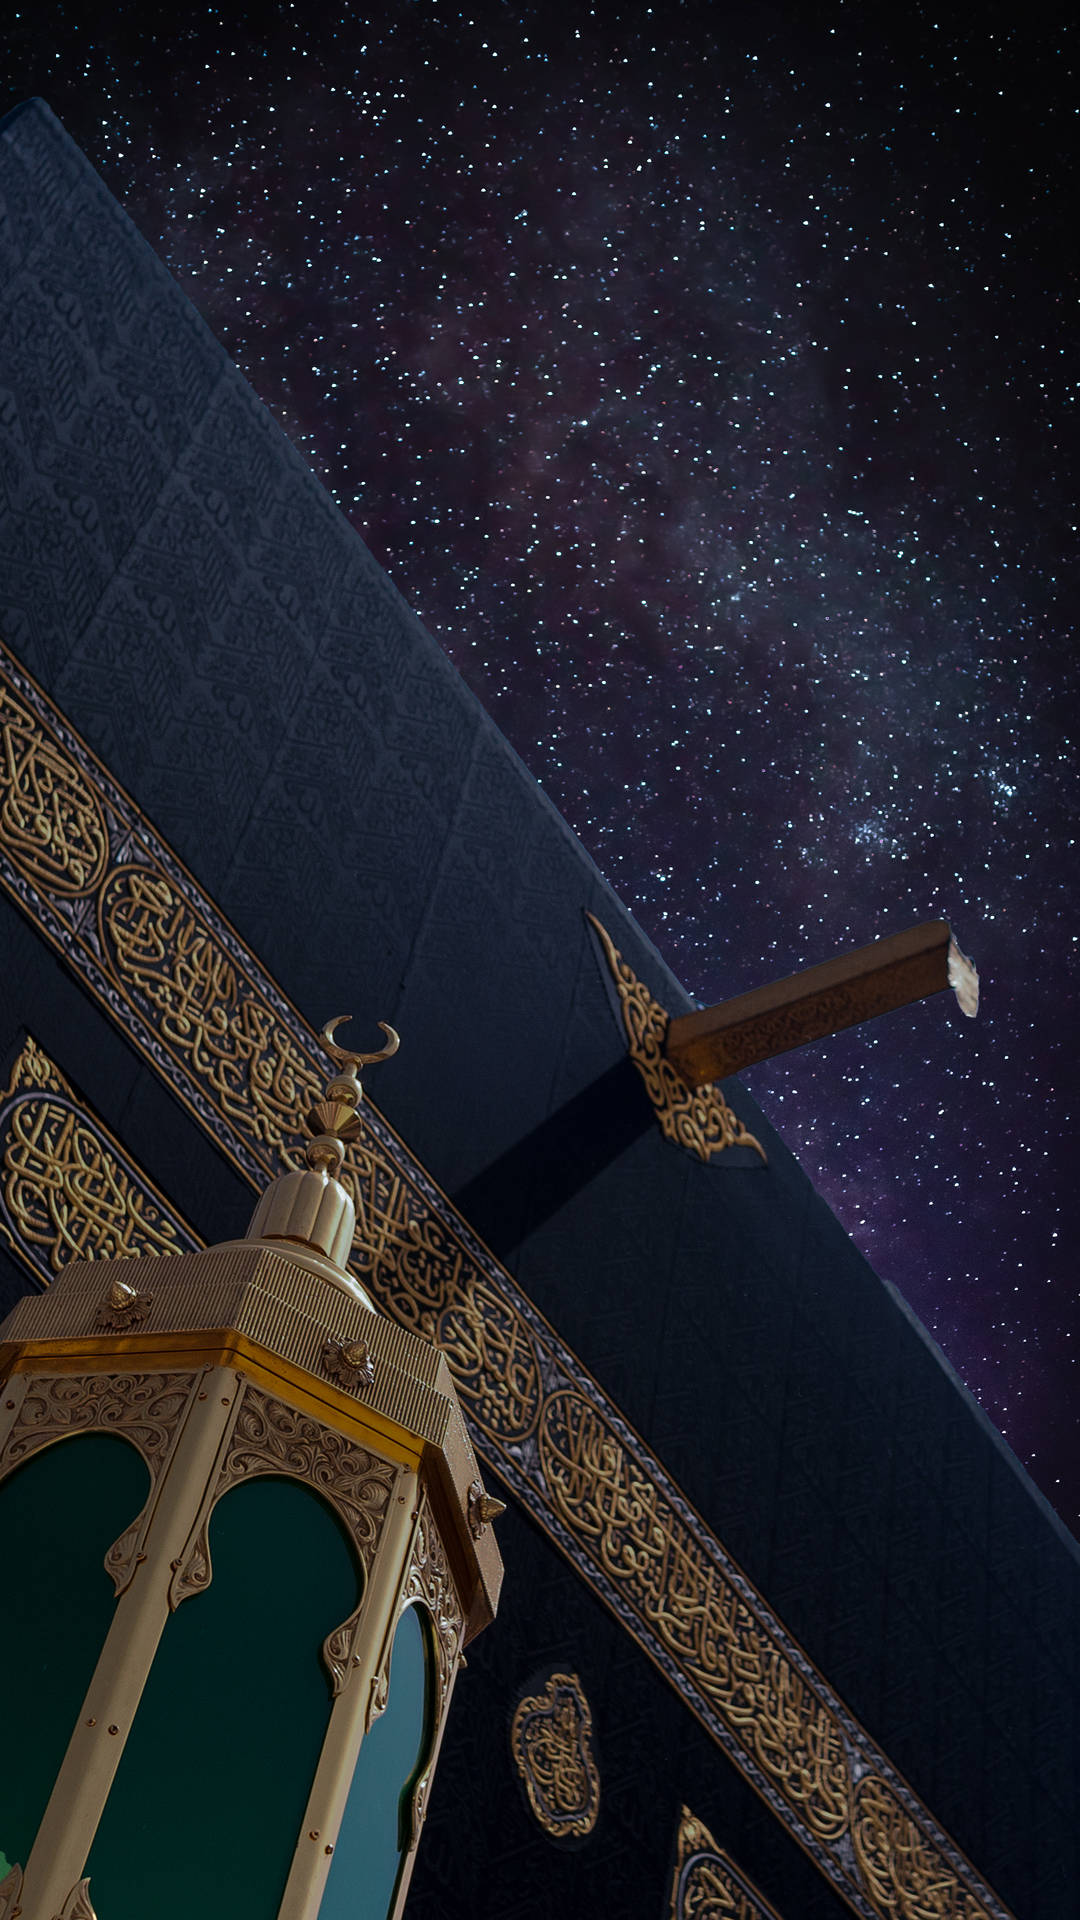 The Kaaba Under Starry Skies